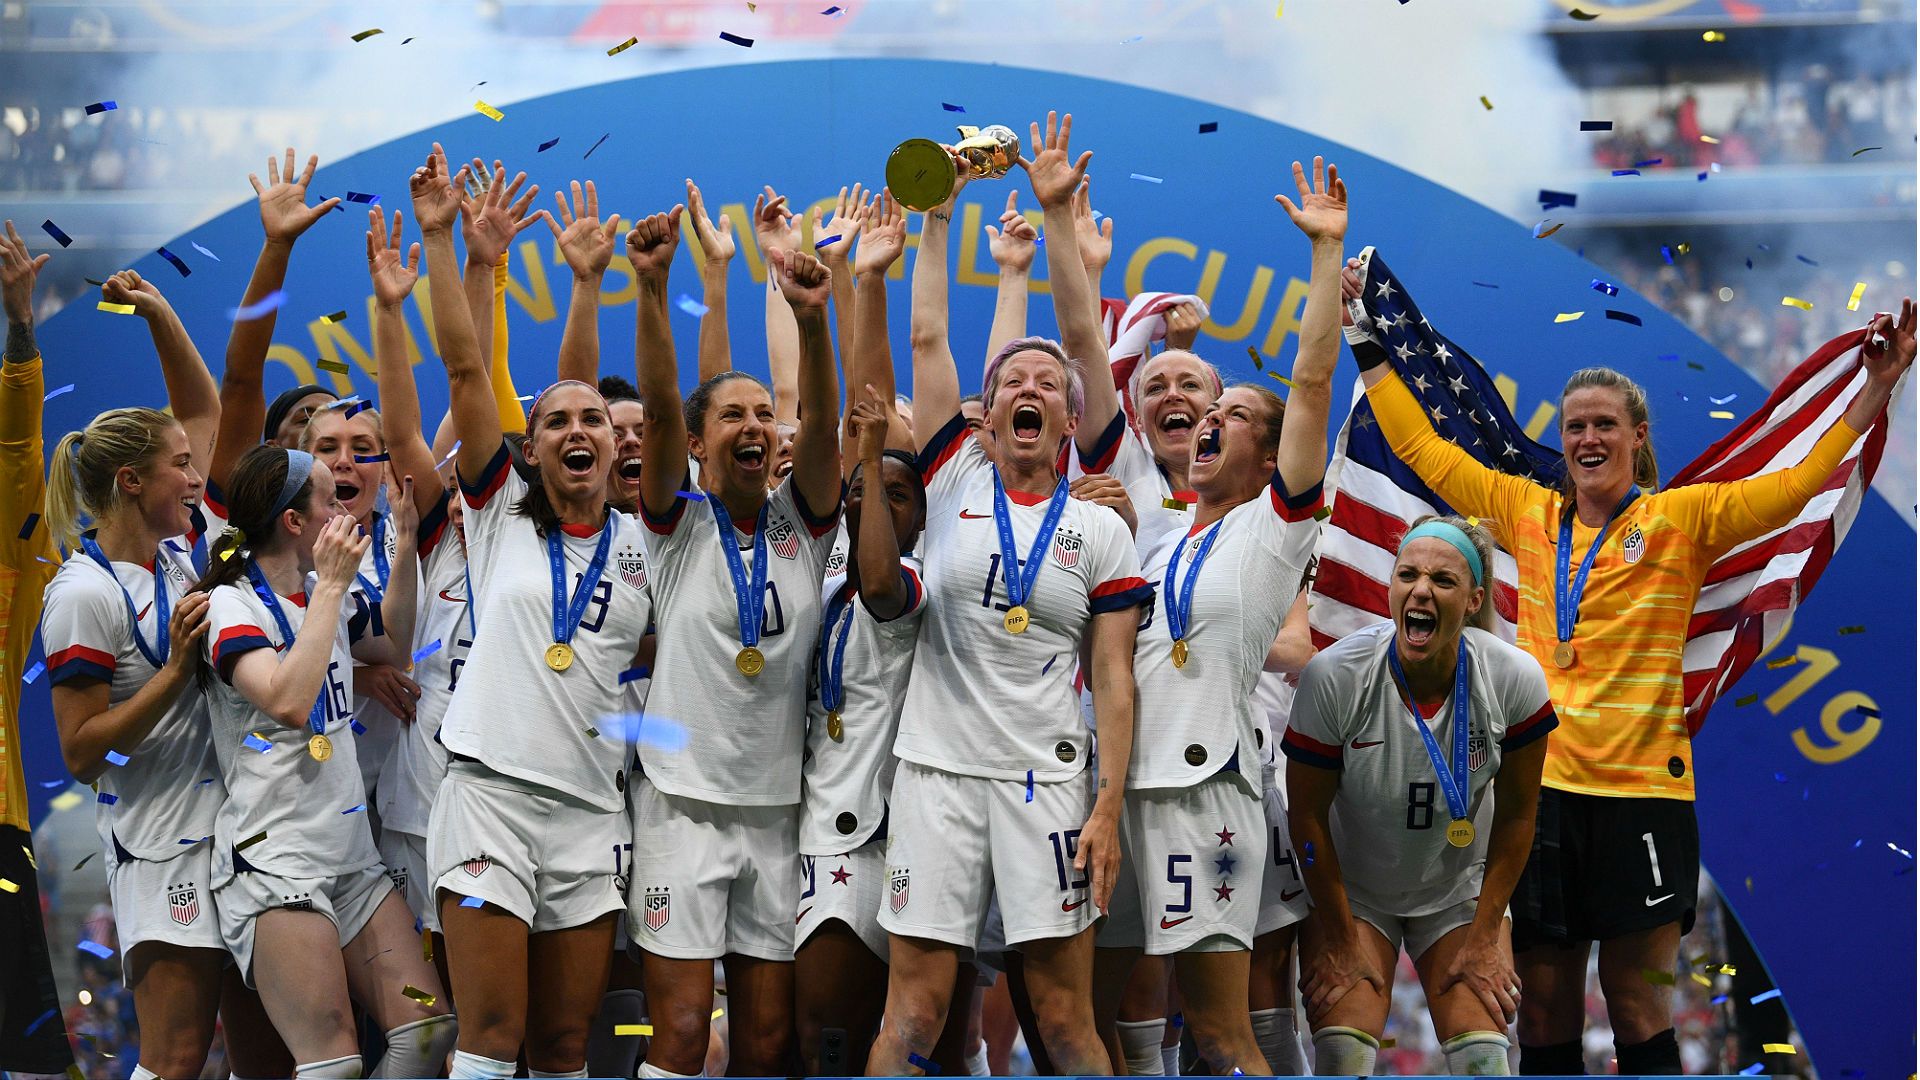 USWNT vs. Netherlands results: USA win historic fourth World Cup